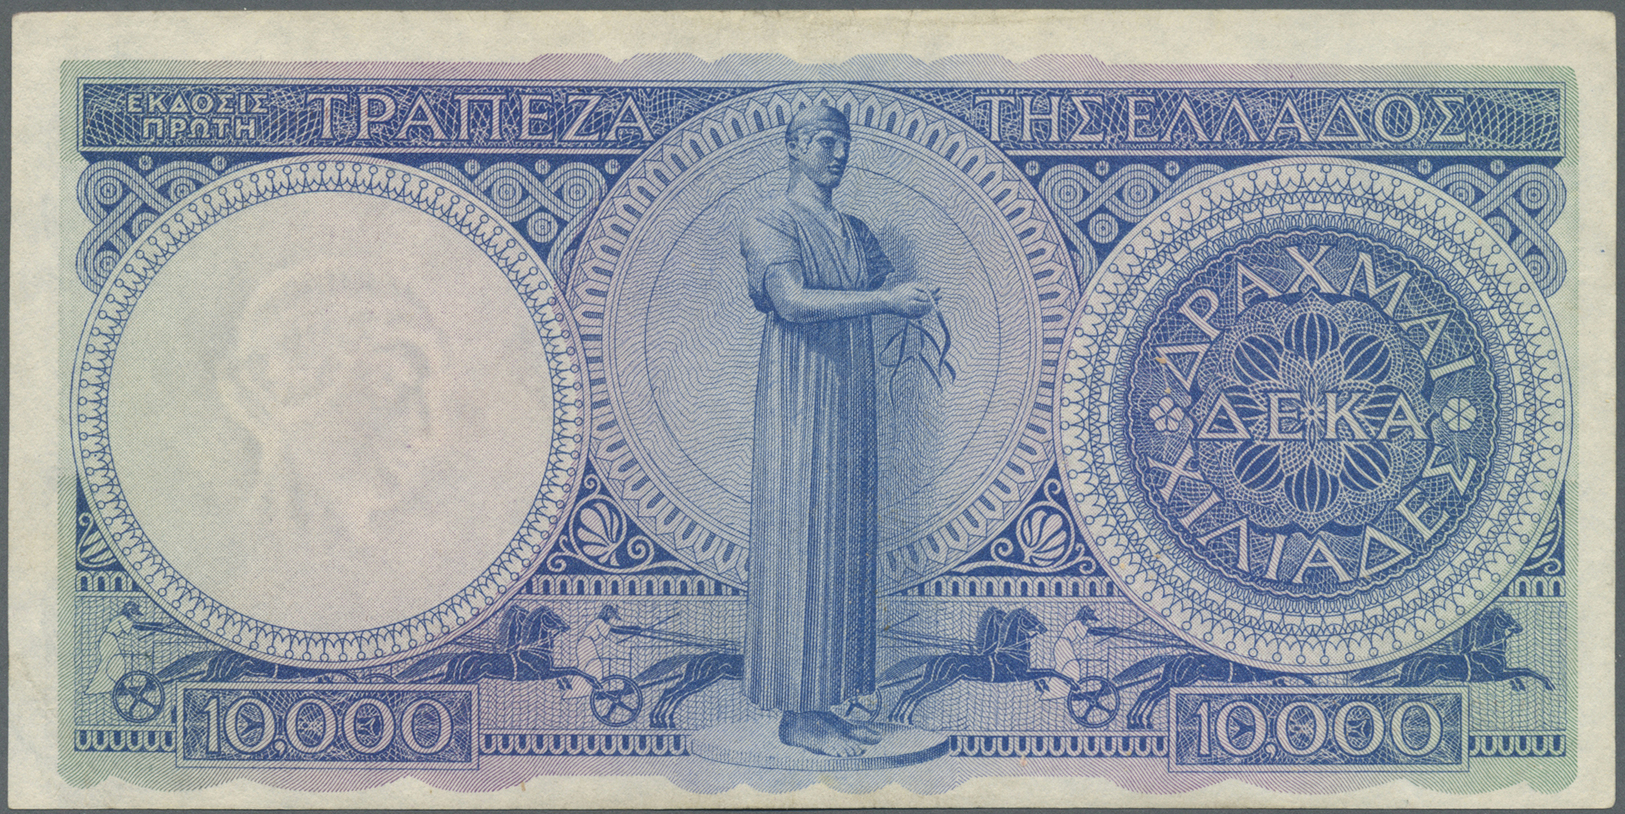 00942 Greece / Griechenland: 10.000 Drachmai ND(1946) P. 175, Unfolded, Light Creases At Borders, Crisp And Colorful, Co - Greece